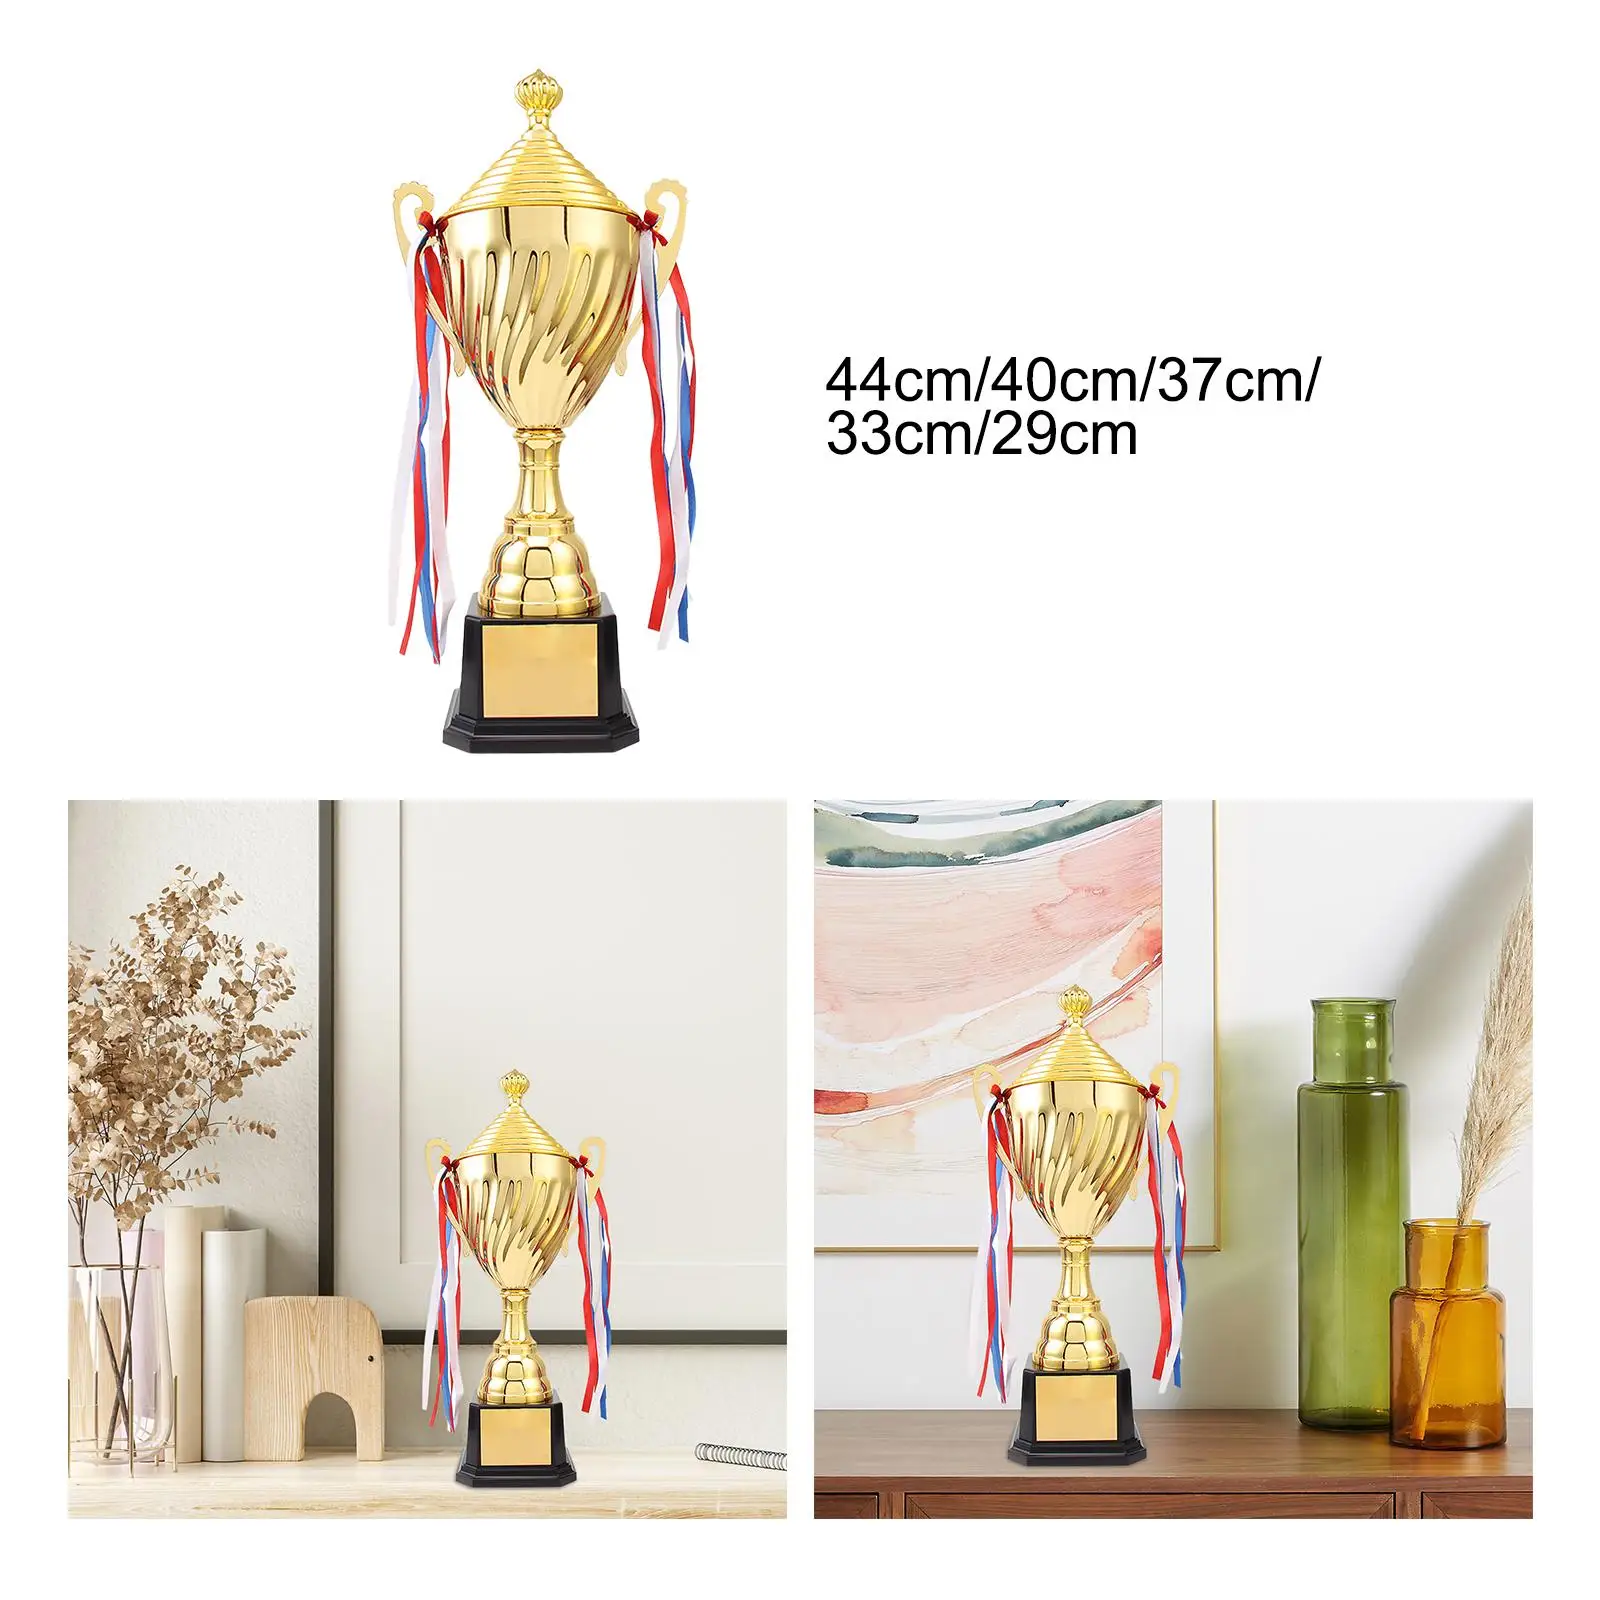 Award Trophy Cup for Kids Adults Boys Girls Sports Tournaments Trophies Prop